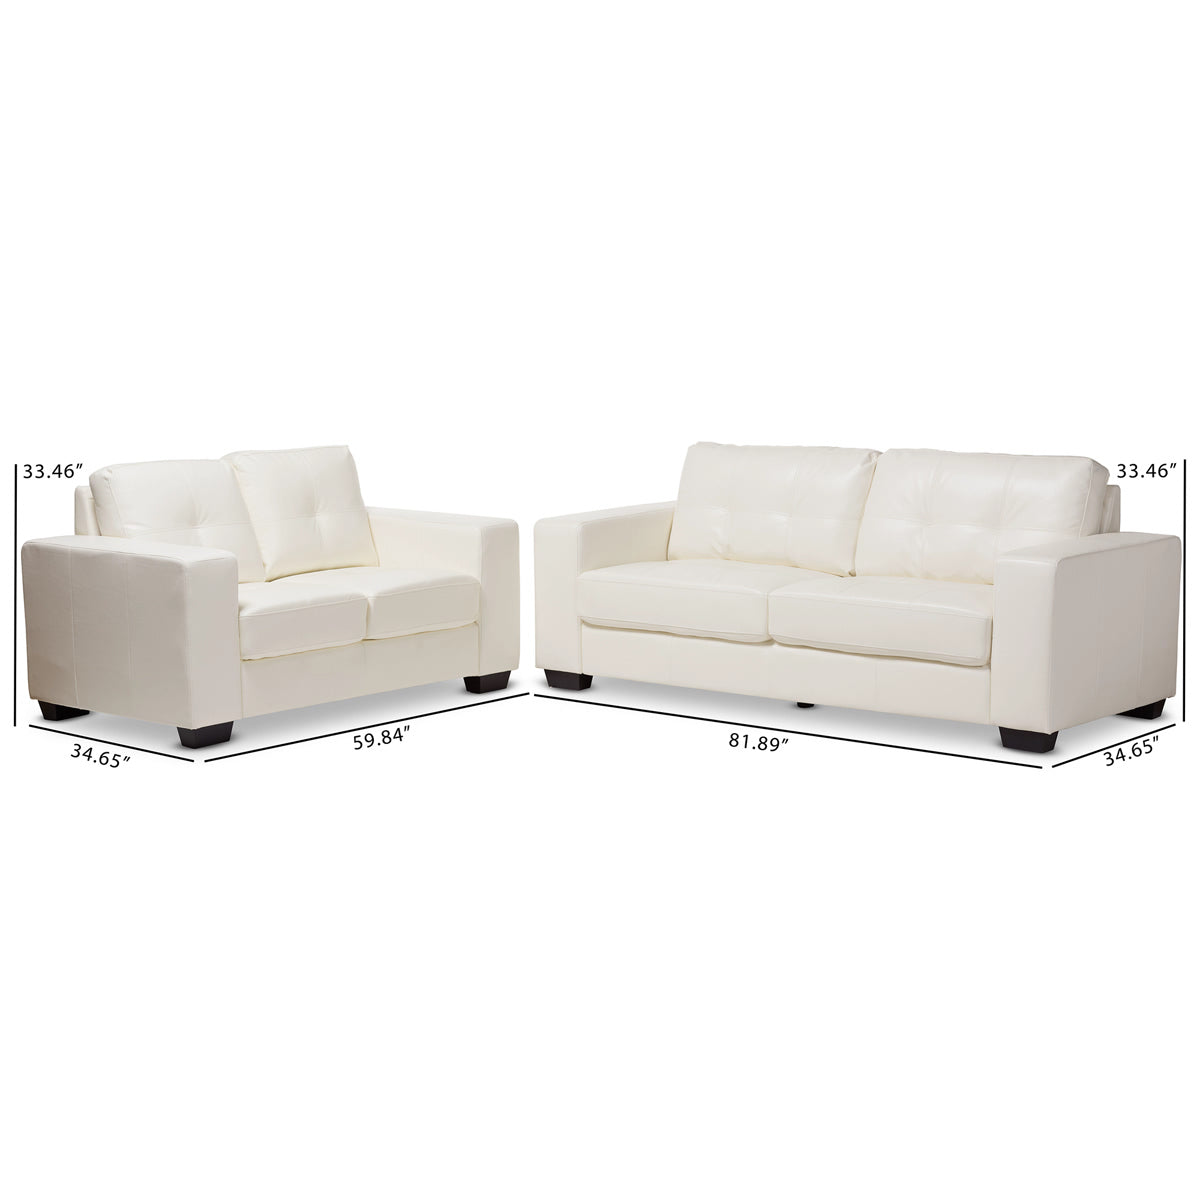 Baxton Studio Adalynn Modern and Contemporary White Faux Leather Upholstered 2-Piece Livingroom Set Baxton Studio-0-Minimal And Modern - 6